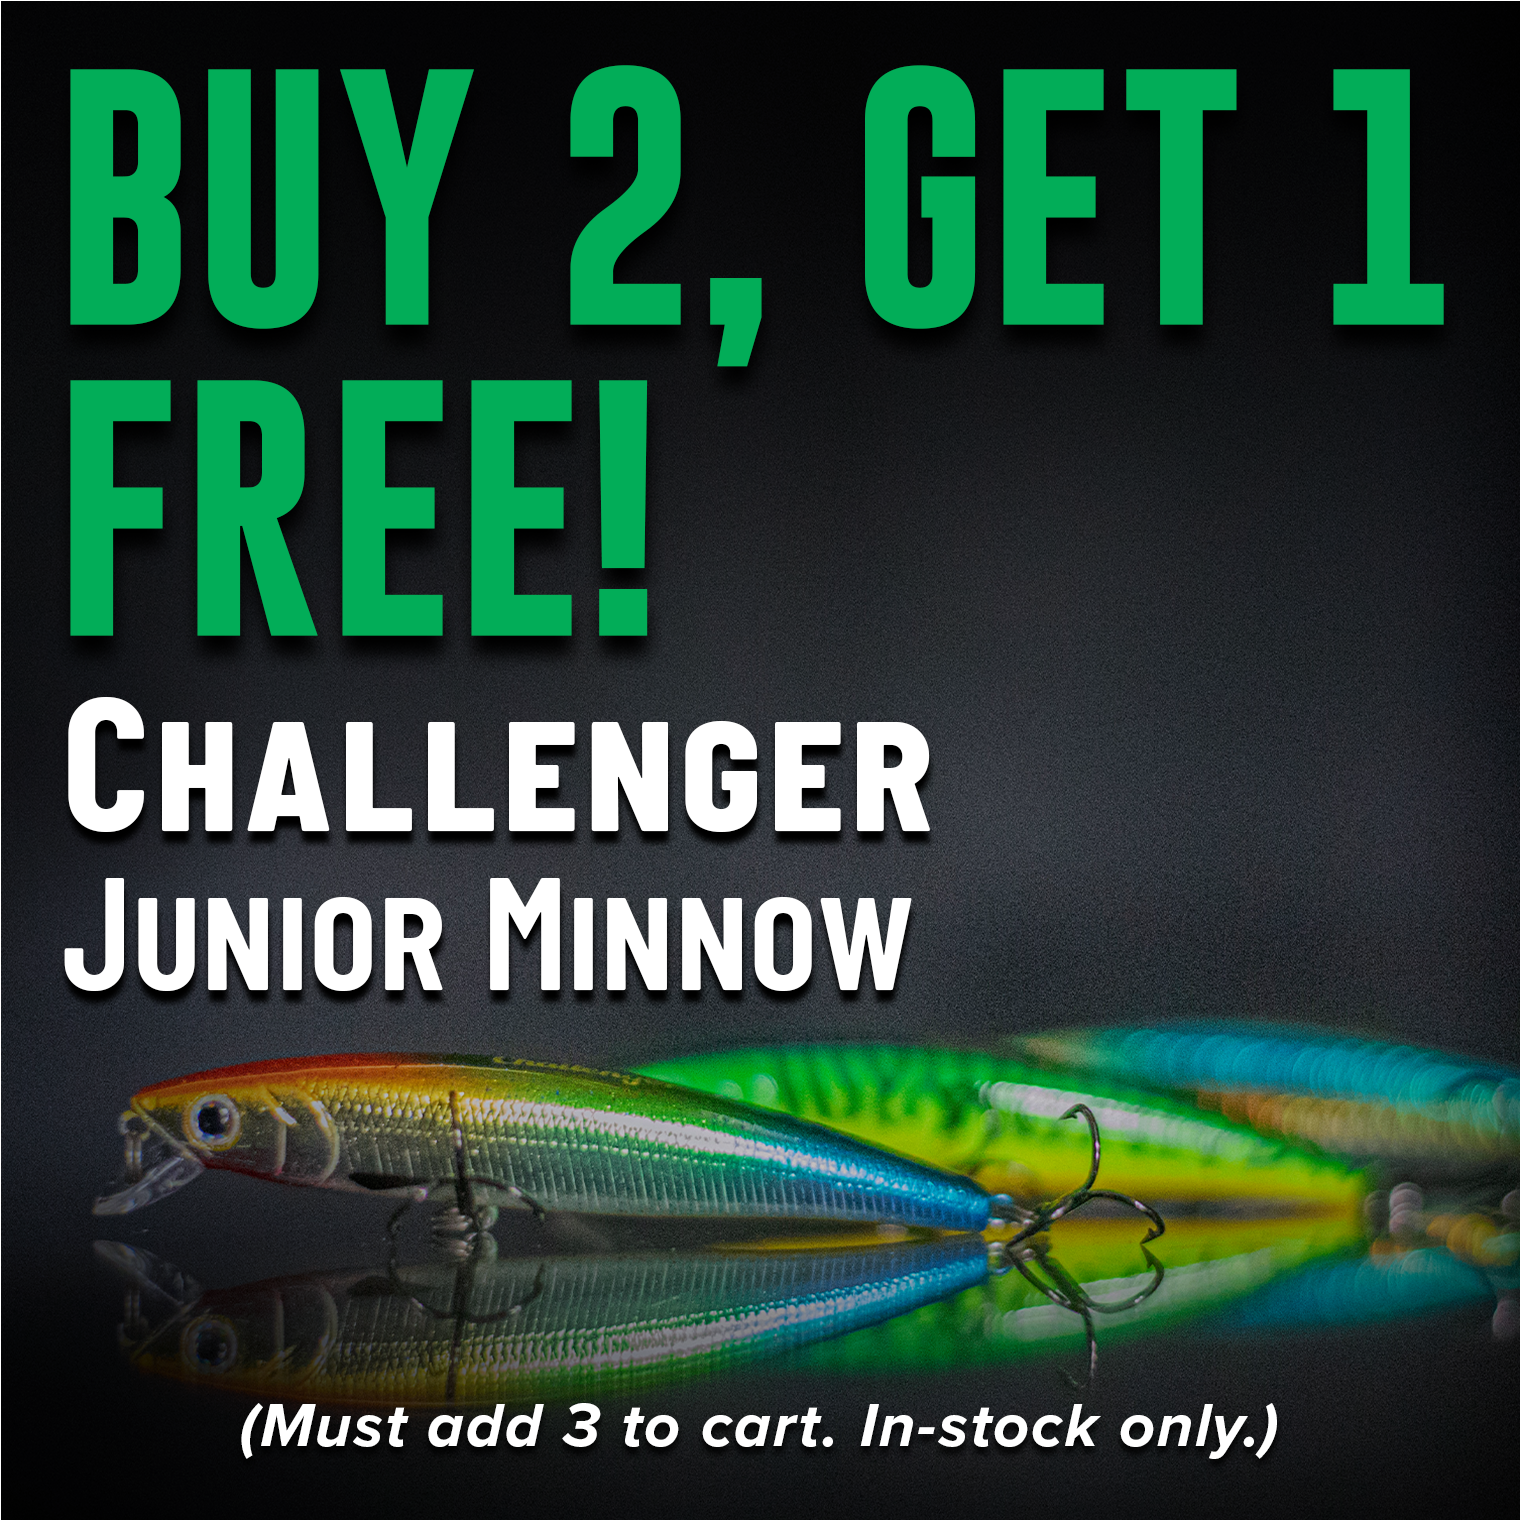 Buy 2, Get 1 Free! Challenger Junior Minnow (Must add 3 to cart. In-stock only.)